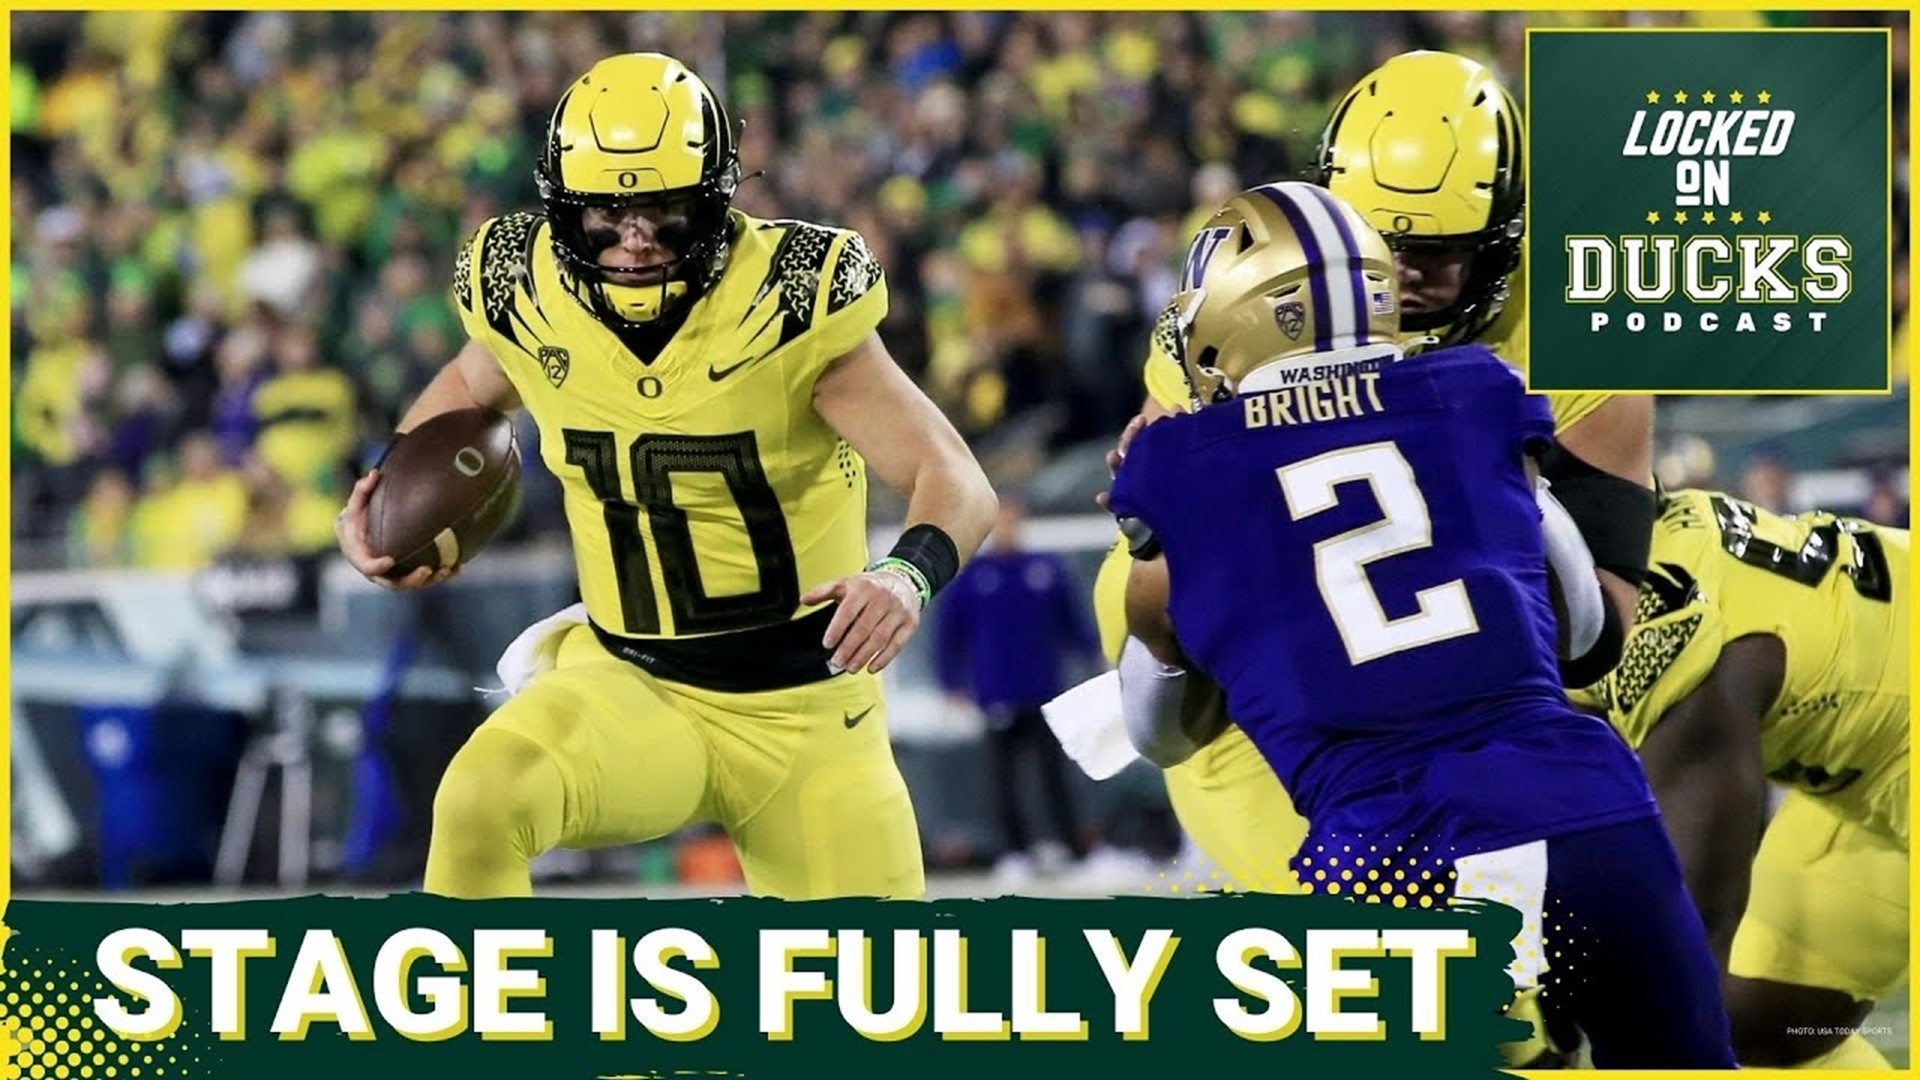 The Washington Huskies host their rival, the Oregon Ducks, on Saturday. The hosts of Locked On Huskies and Locked On Ducks preview the matchup.